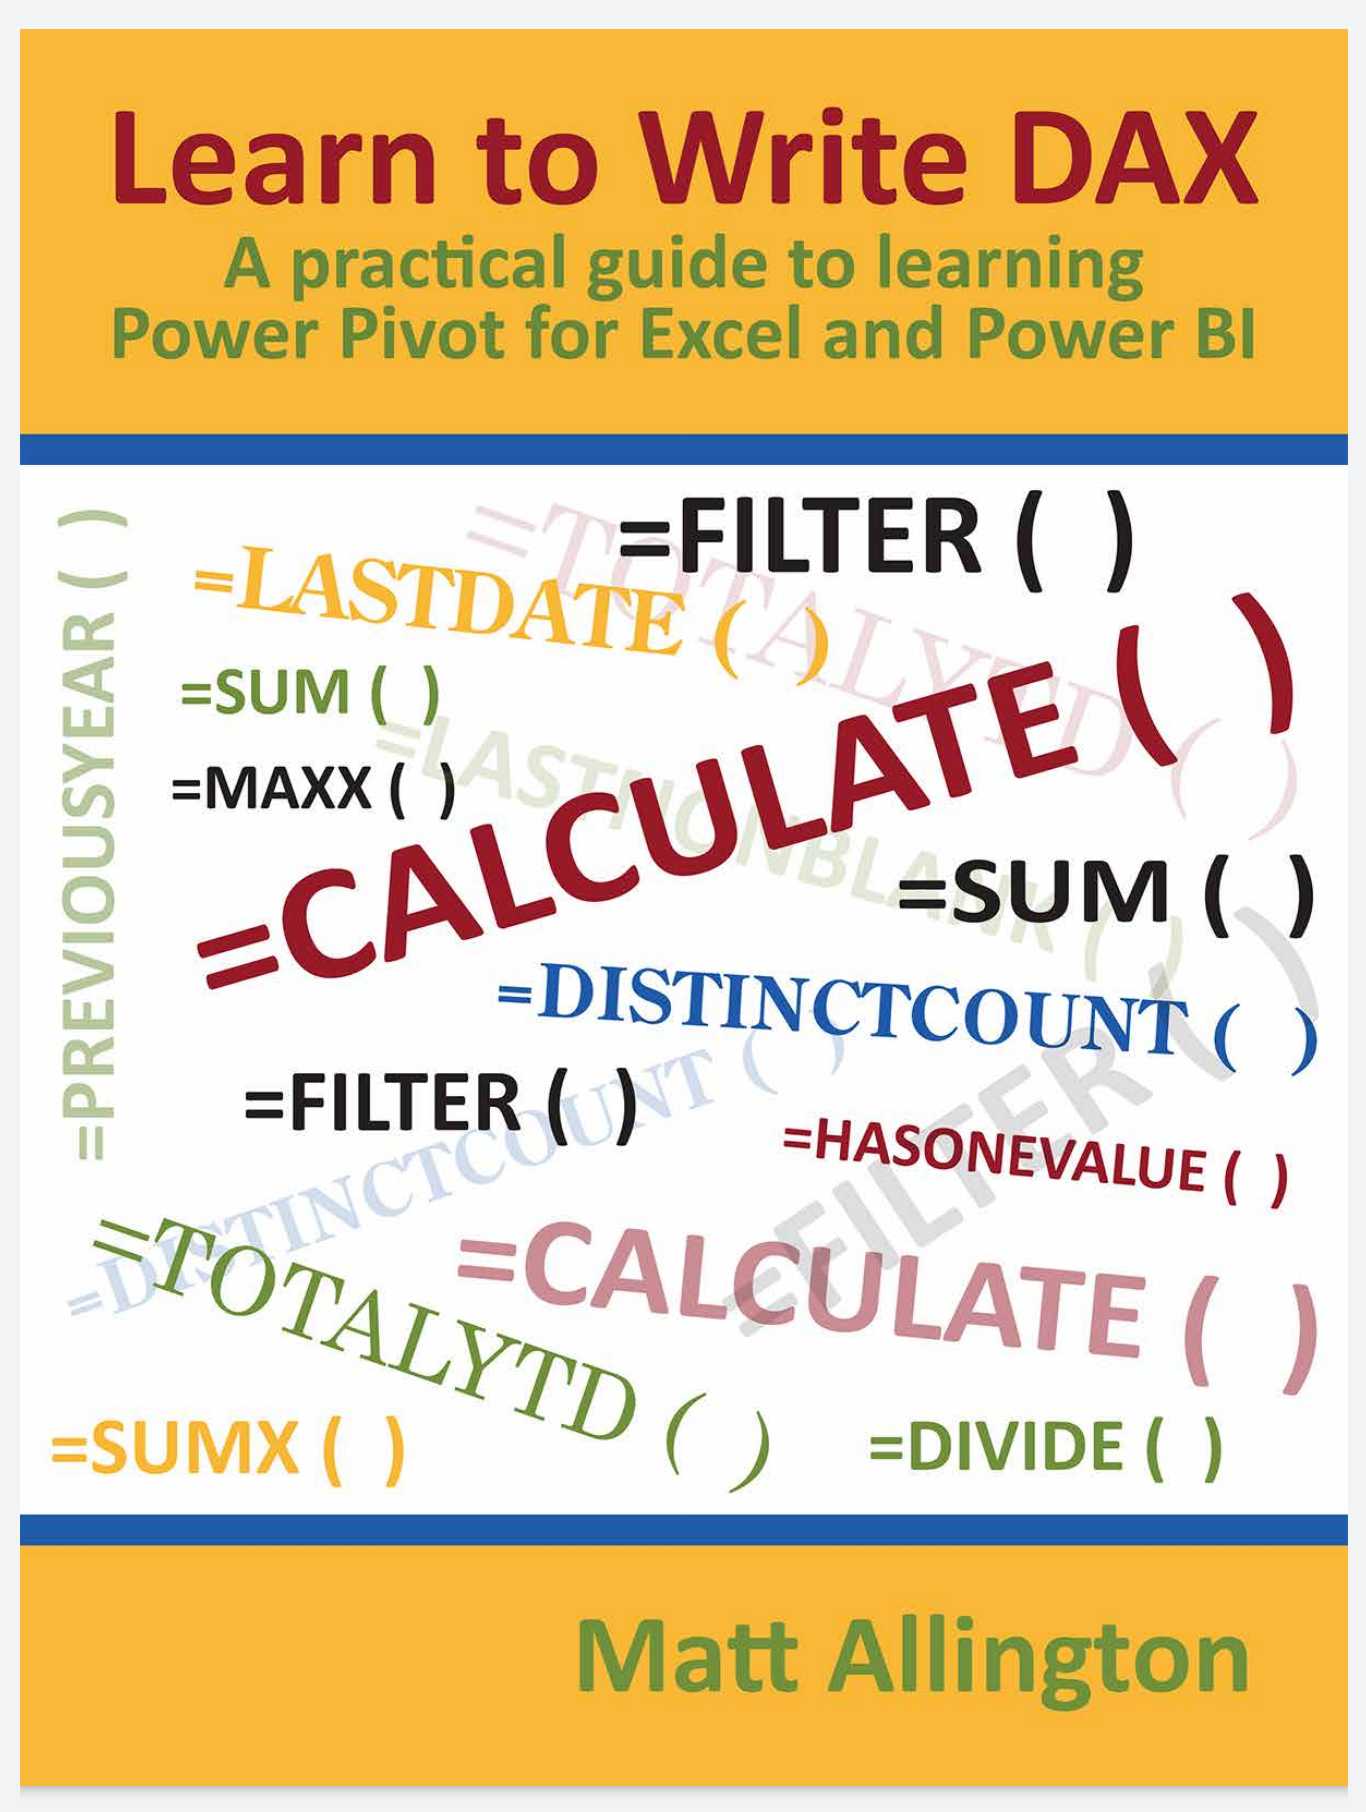 Learn to write DAX: a practical guide to learning Power Pivot for Excel and Power BI